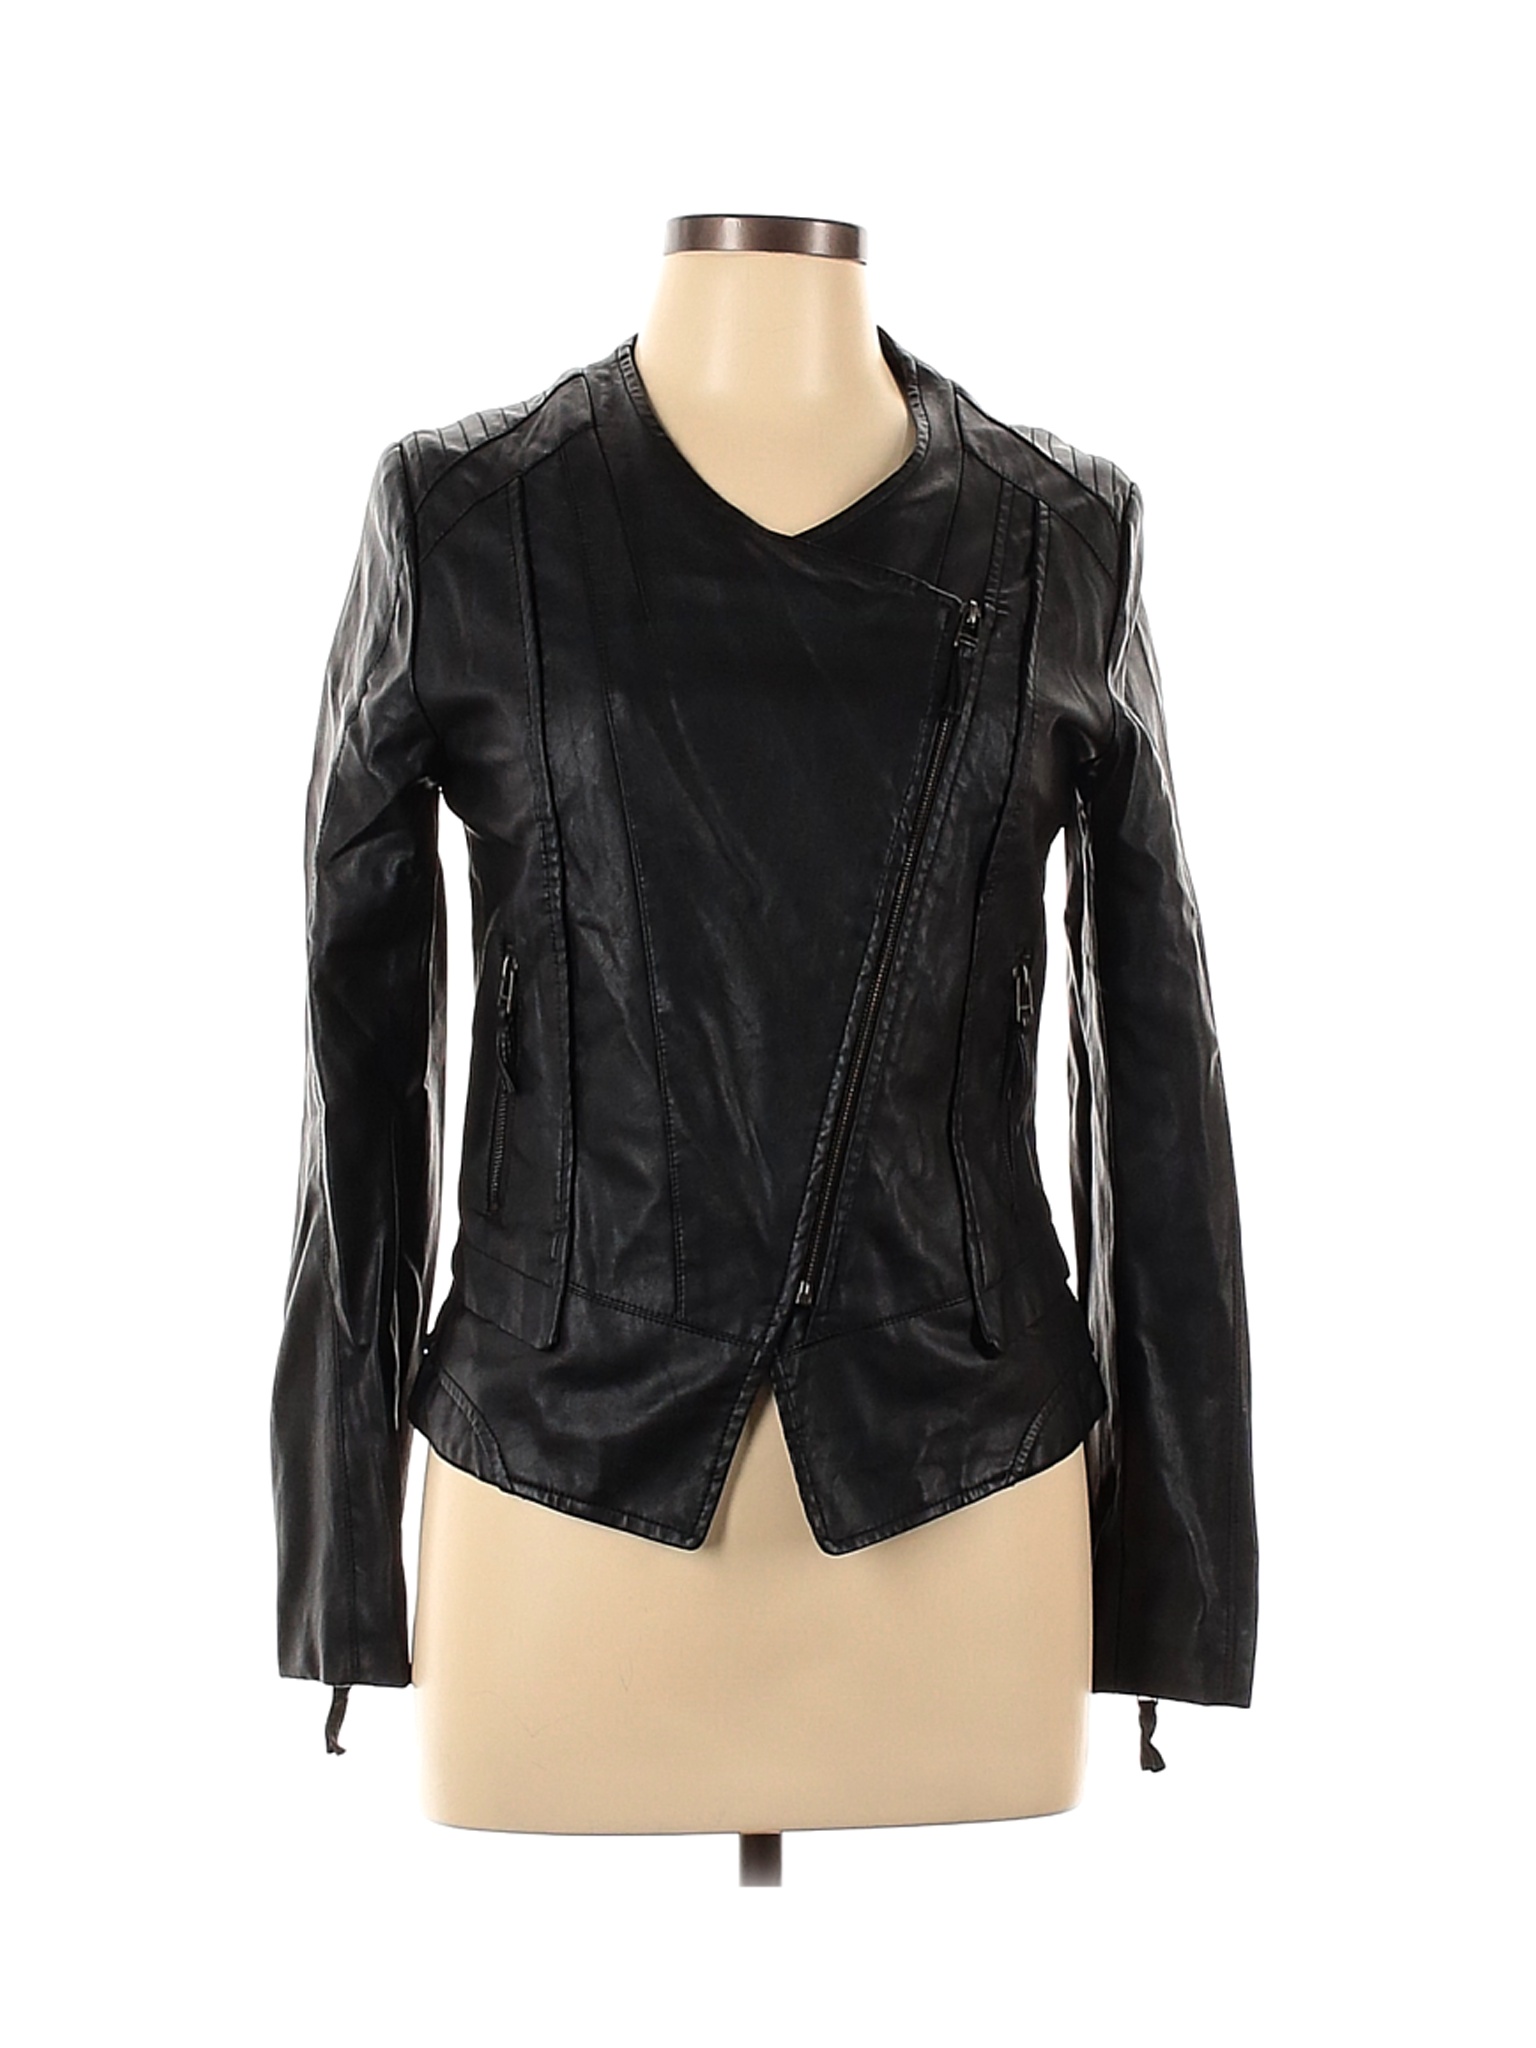 Trafaluc by Zara Solid Black Faux Leather Jacket Size L - 71% off | ThredUp